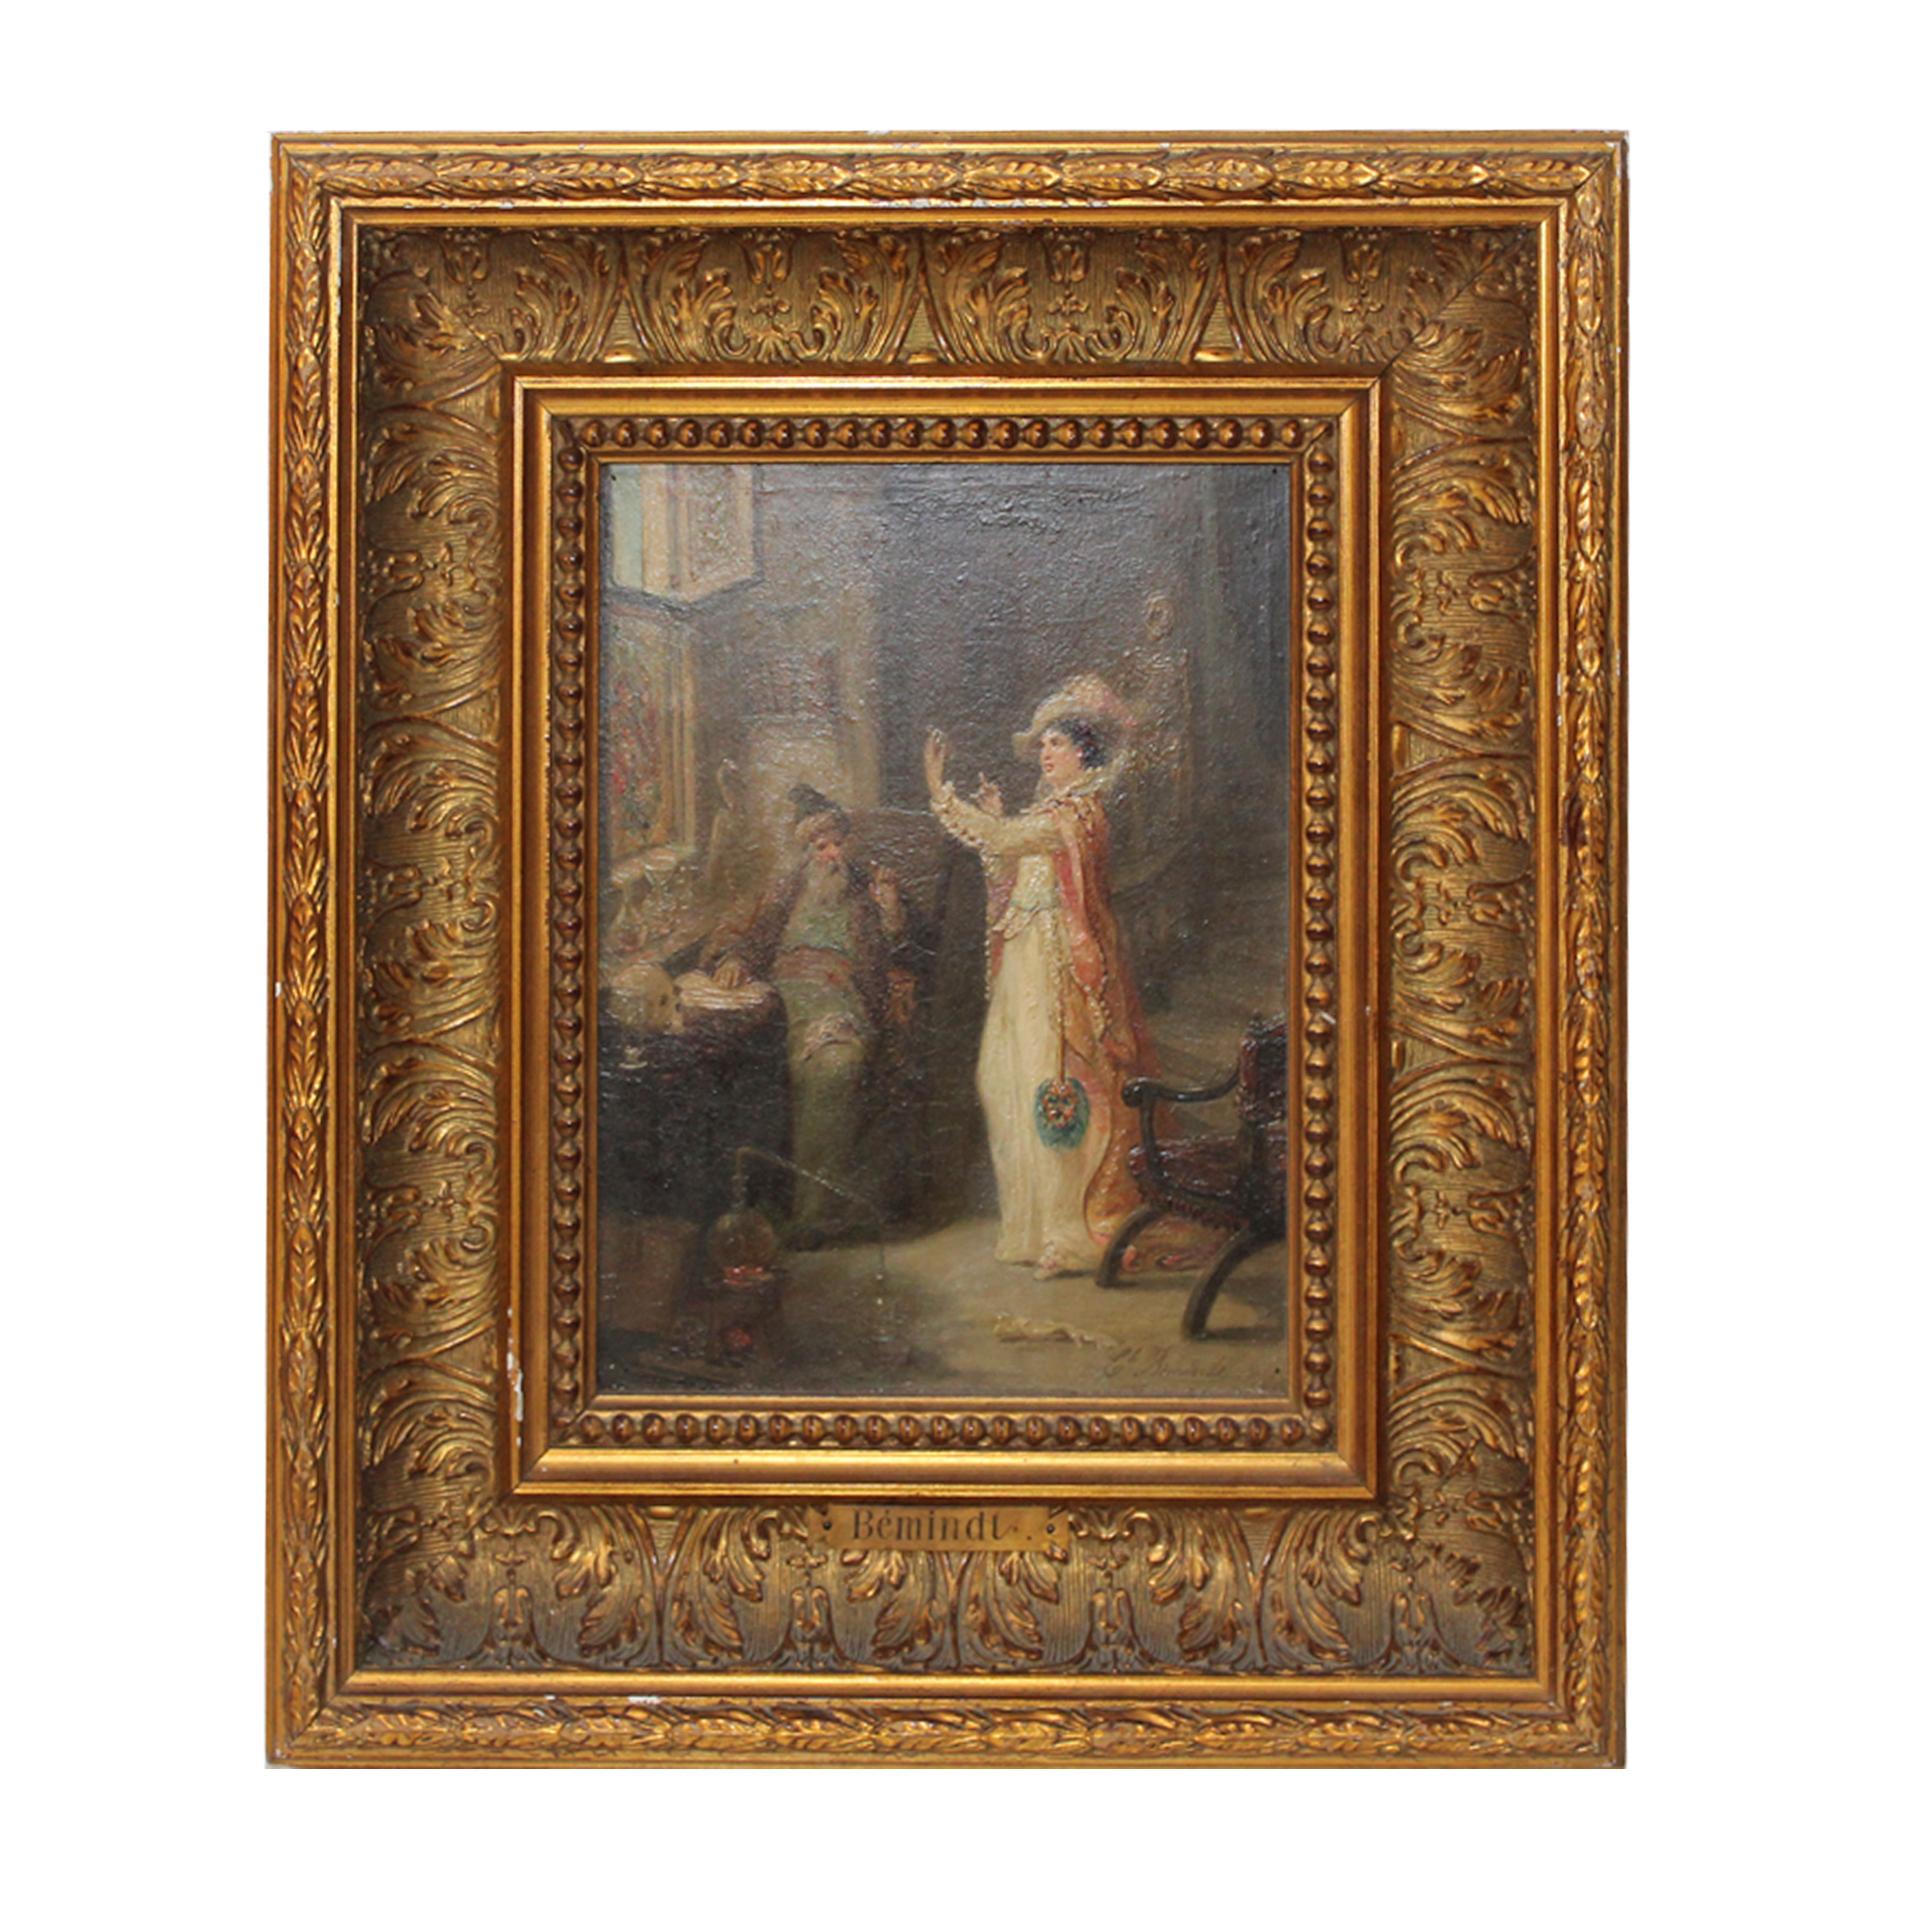 Oil on canvas.
Signed in the lower right corner.

Émile Bemindt was a French artist active between 1859 and 1872 and is best known for his work in the Rococo Revival style: in the late 19th century, there was a renewed interest in Rococo and artists